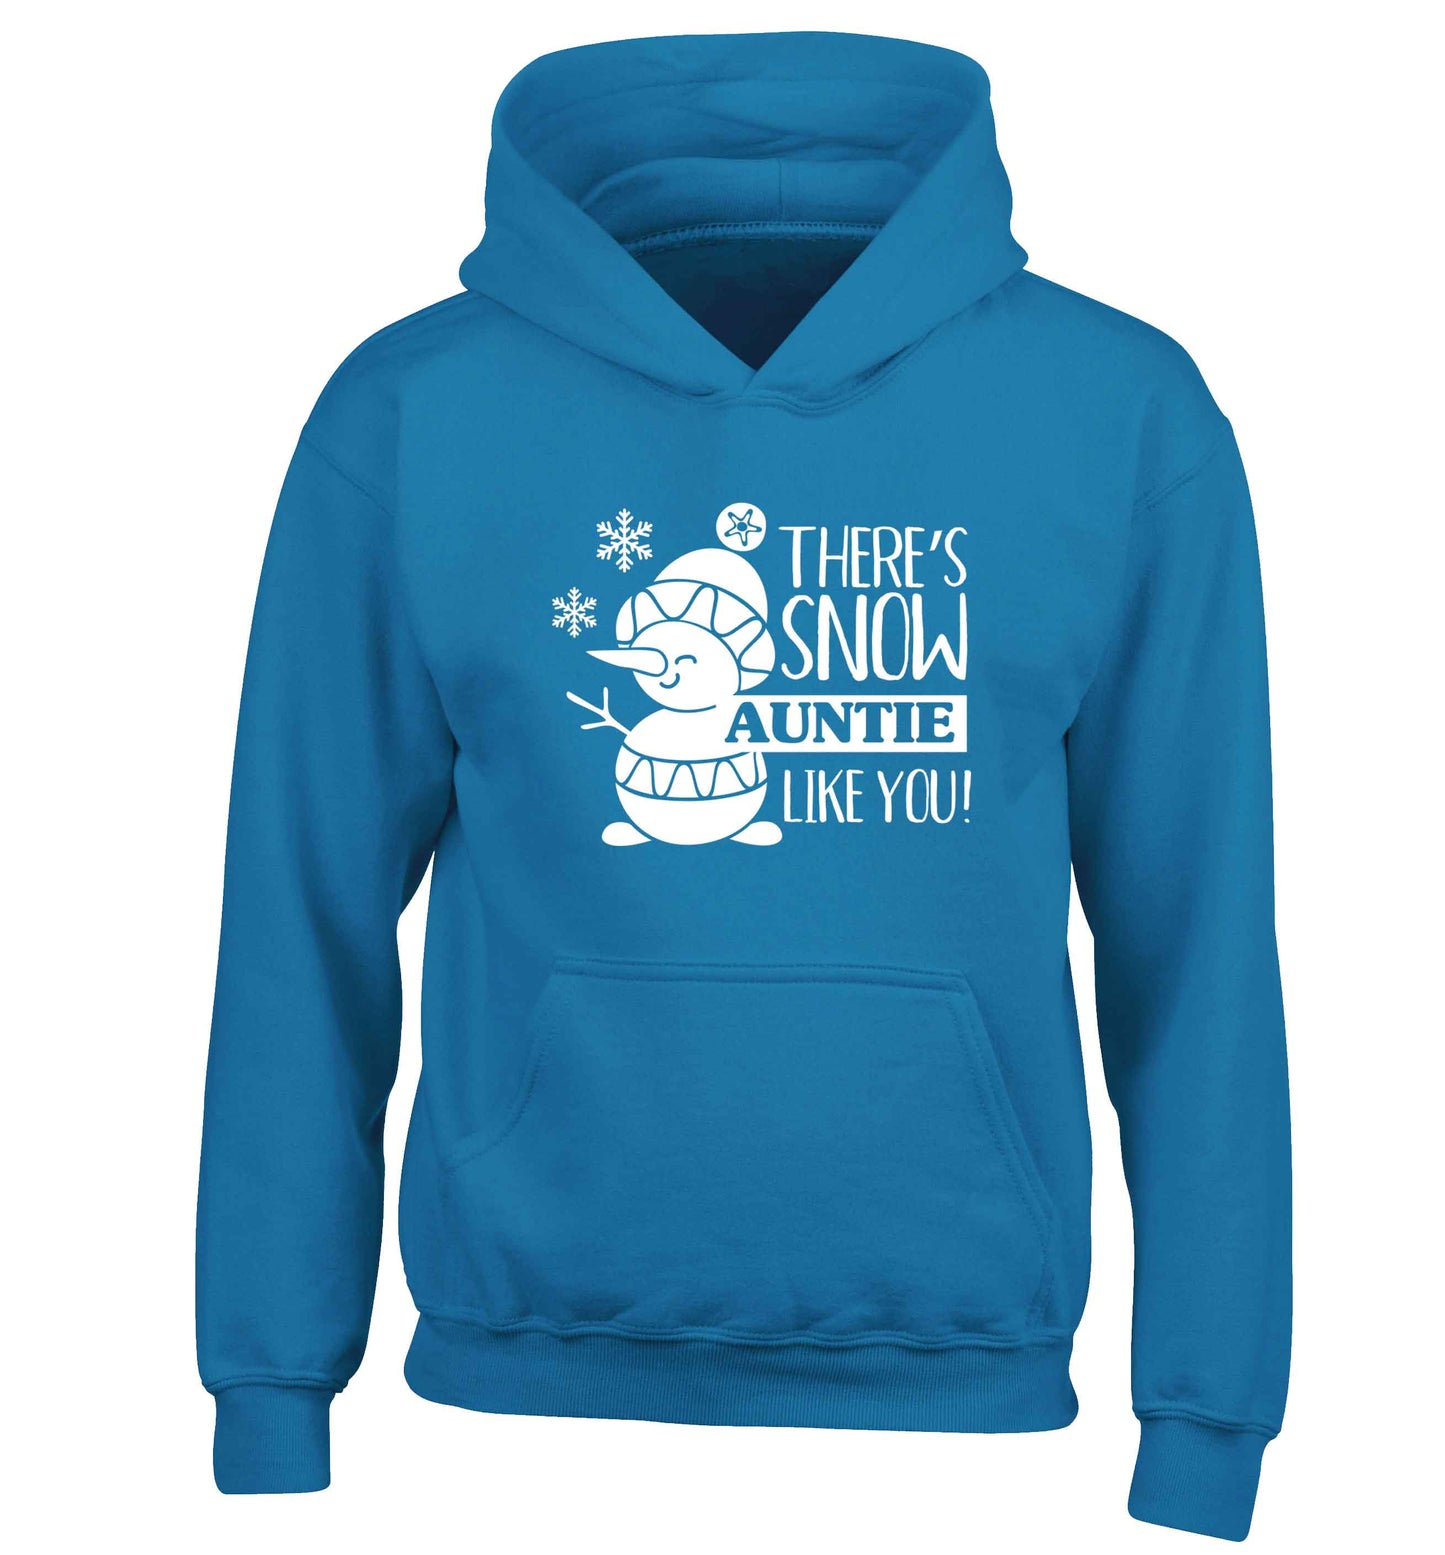 There's snow auntie like you children's blue hoodie 12-13 Years